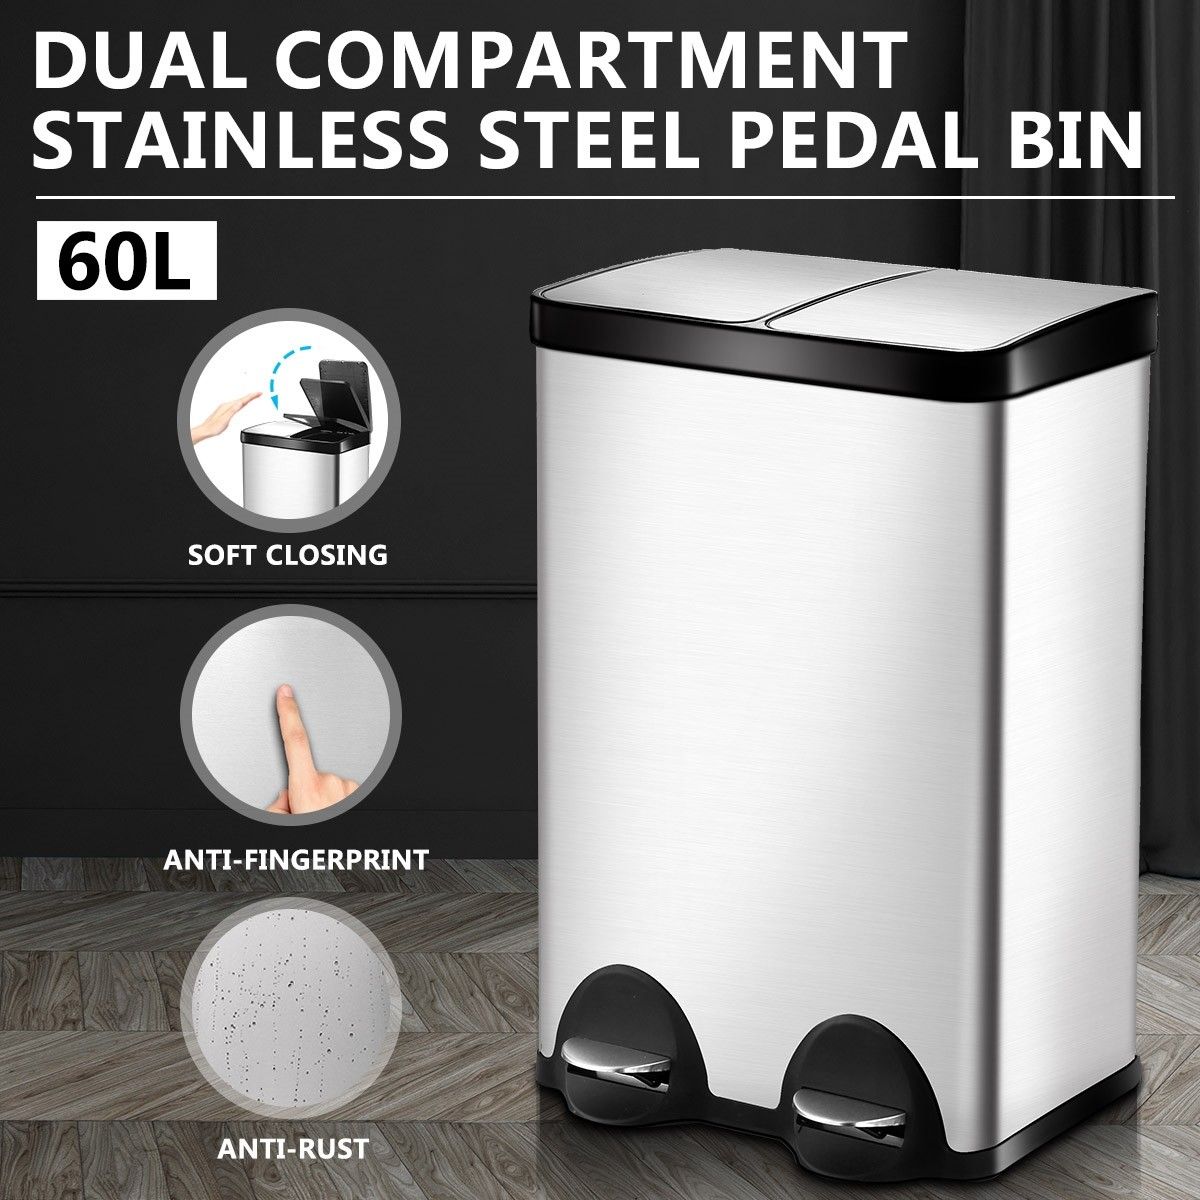 60L Dual Compartment Pedal Garbage Rubbish Bin Stainless Steel Kitchen ...